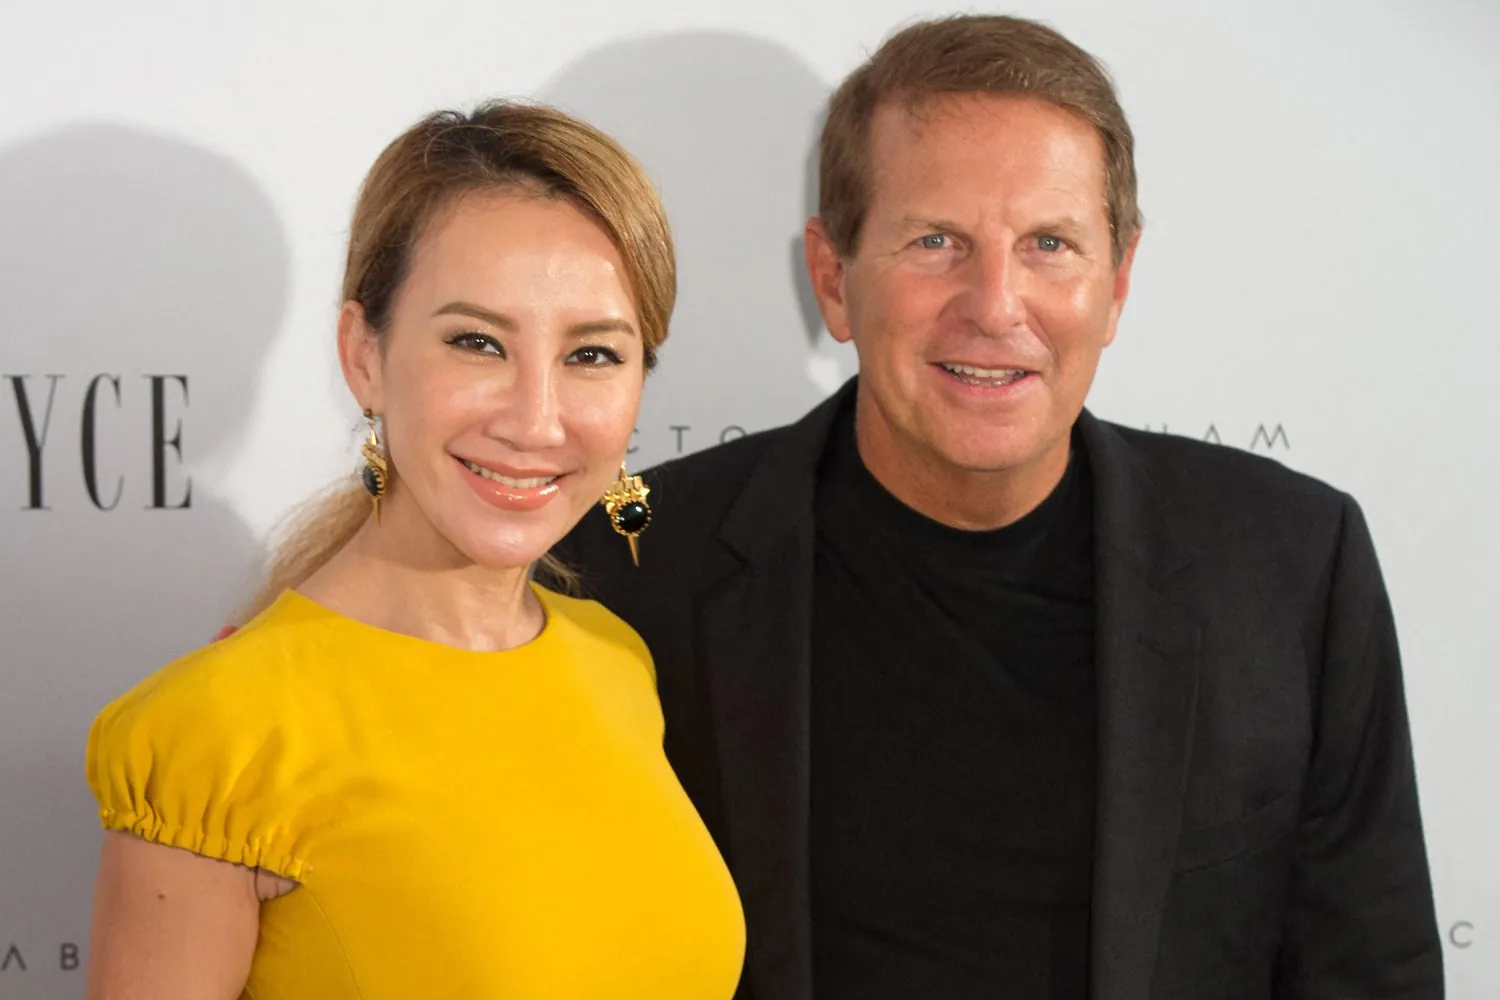 Coco Lee and Bruce Rockowitz